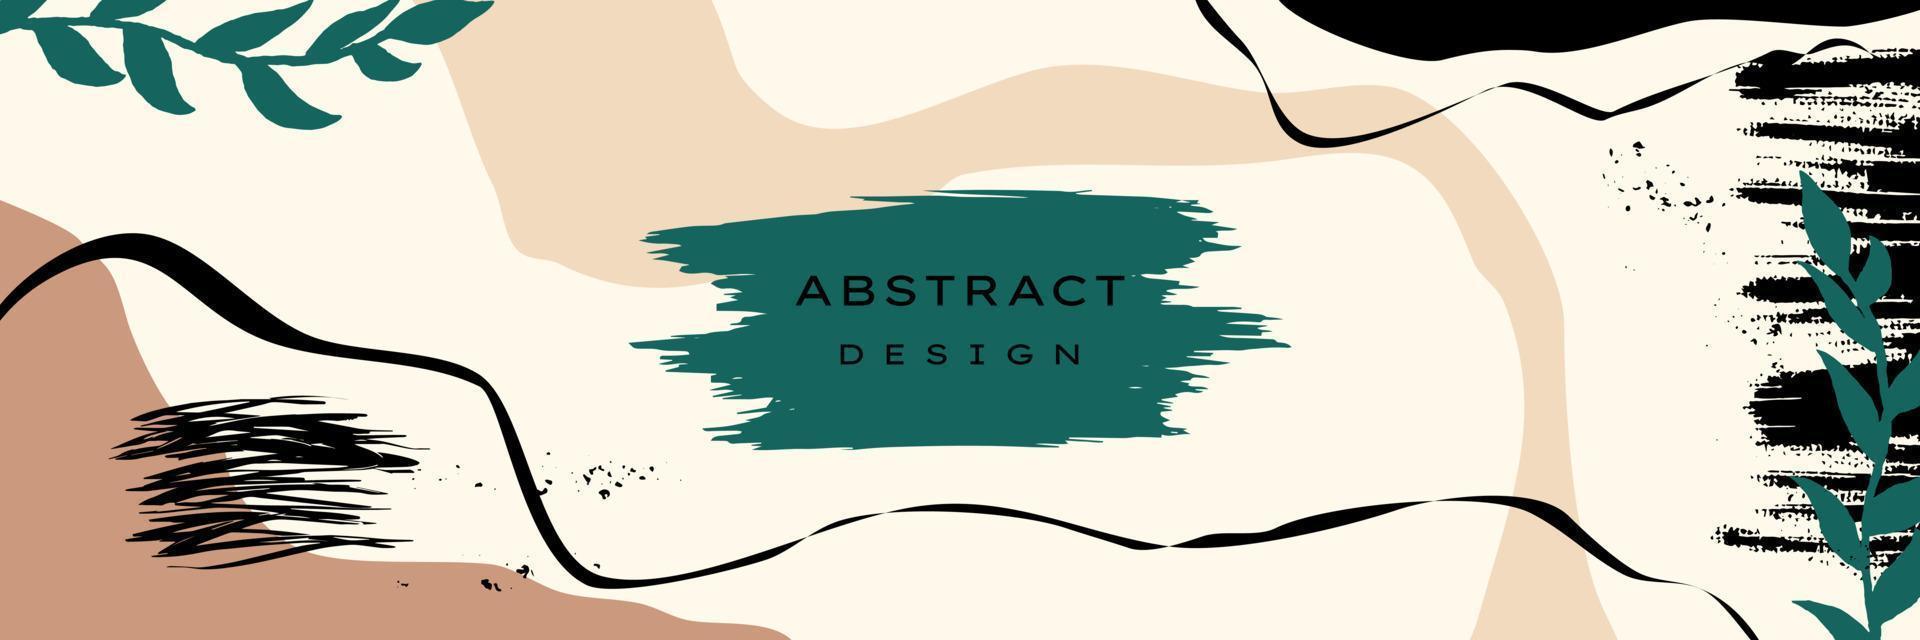 Abstract background various shapes set up. Ideal for cover, poster, business card, flyer,  brochure,magazine first page,social media and other.vector illustration vector